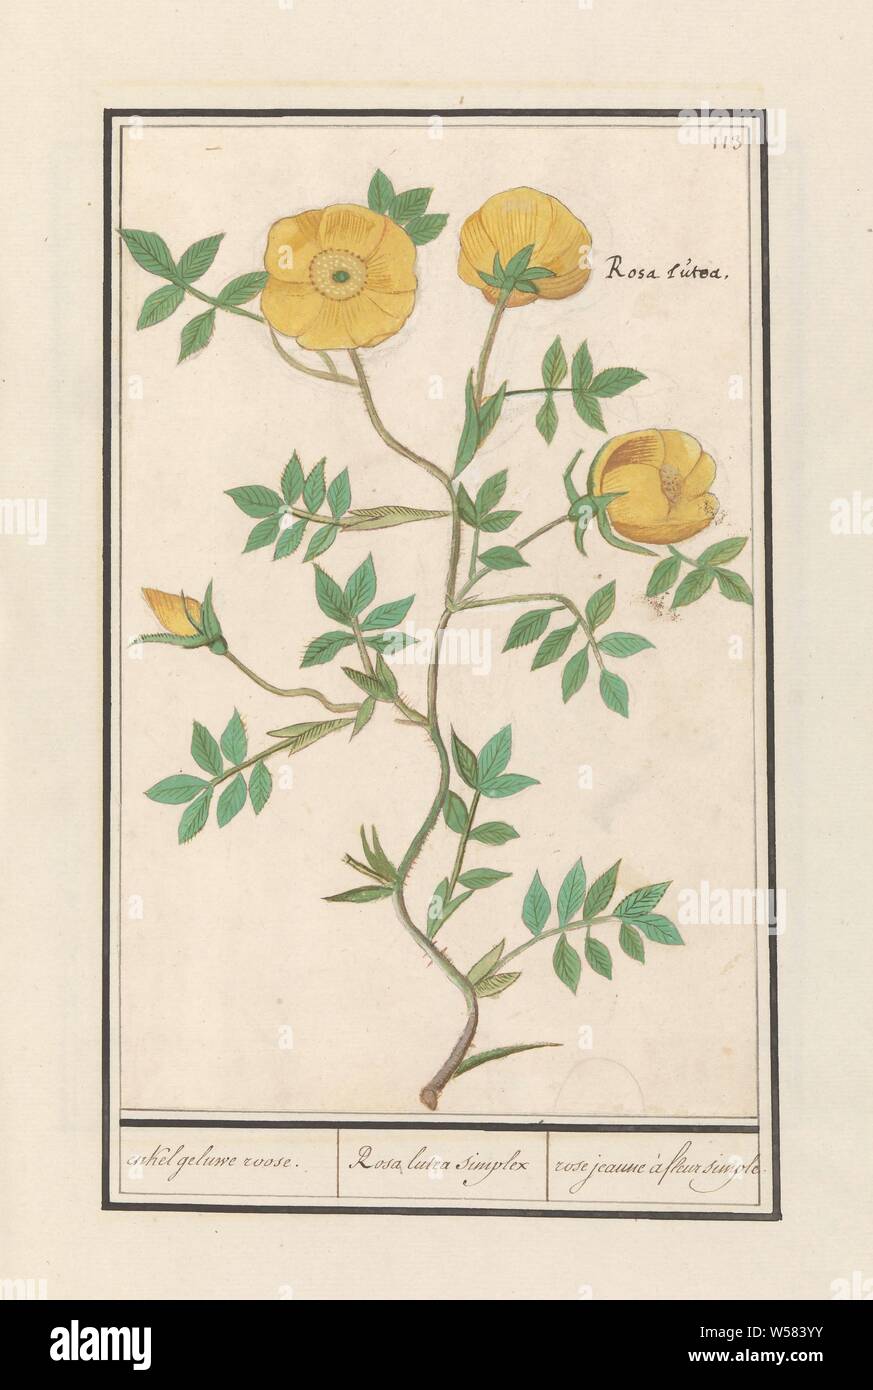 Rose (Rosa) single gel rose / Rosa lutea simplex / rose jeaune à fleur simple (title on object), Yellow rose. Numbered top right: 113. With the Latin name. Part of the second album with drawings of flowers and plants. Ninth of twelve albums with drawings of animals, birds and plants known around 1600, commissioned by Emperor Rudolf II. With explanations in Dutch, Latin and French., Anselmus Boetius de Boodt, 1596 - 1610, paper, watercolor (paint), deck paint, pencil, ink, pen, h 259 mm × w 167 mm Stock Photo